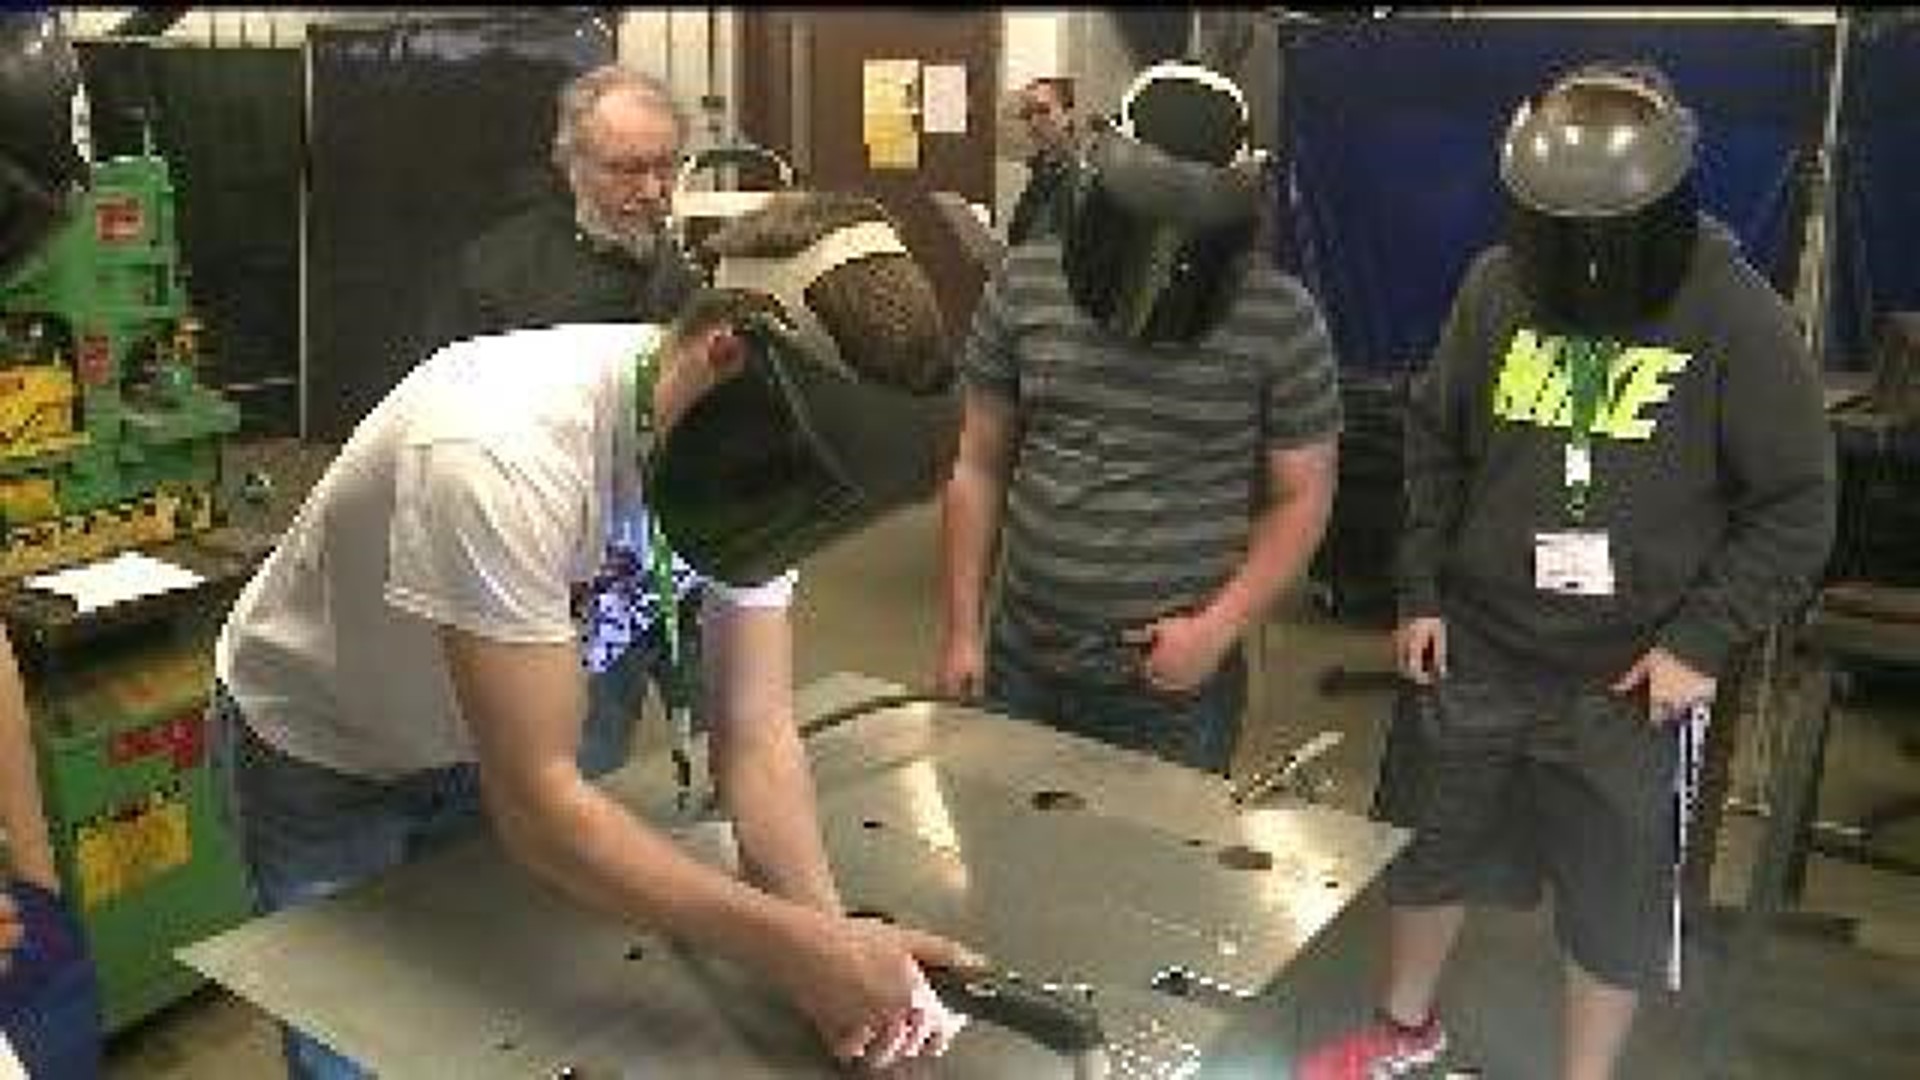 Muscatine area students explored manufacturing, agricultural careers